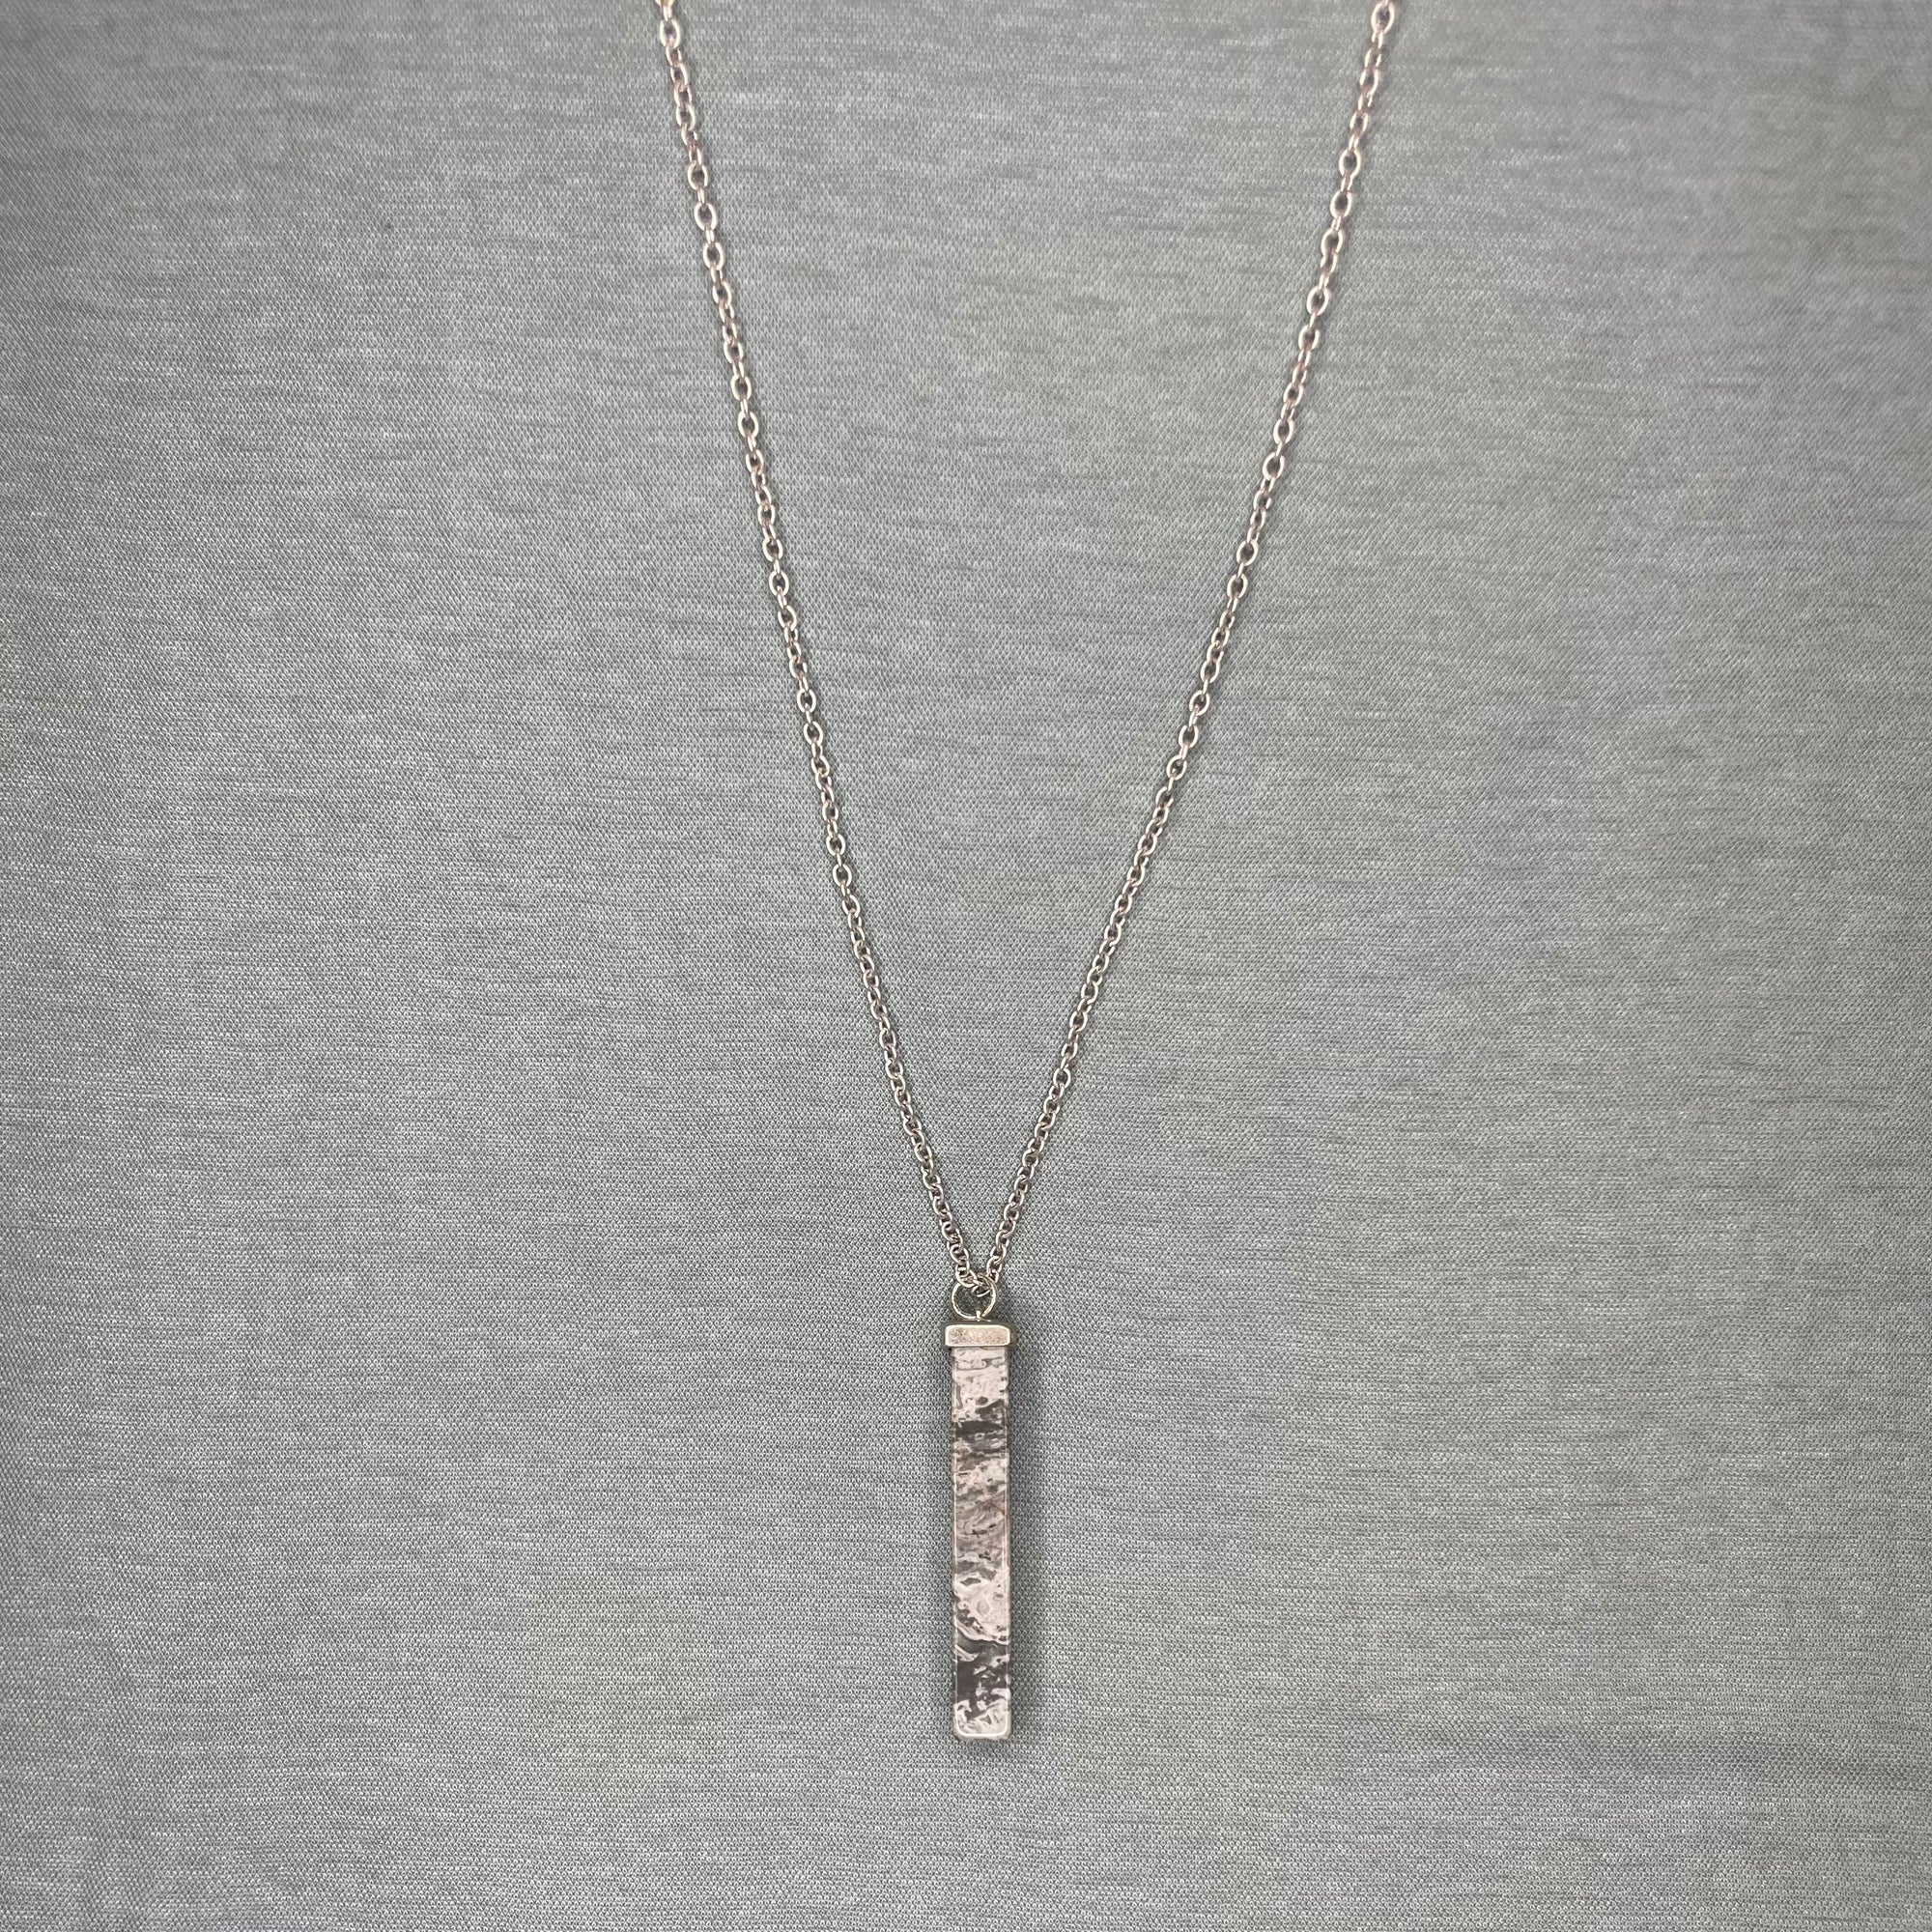 Necklace - Marbled Stone Bar Silver & Grey